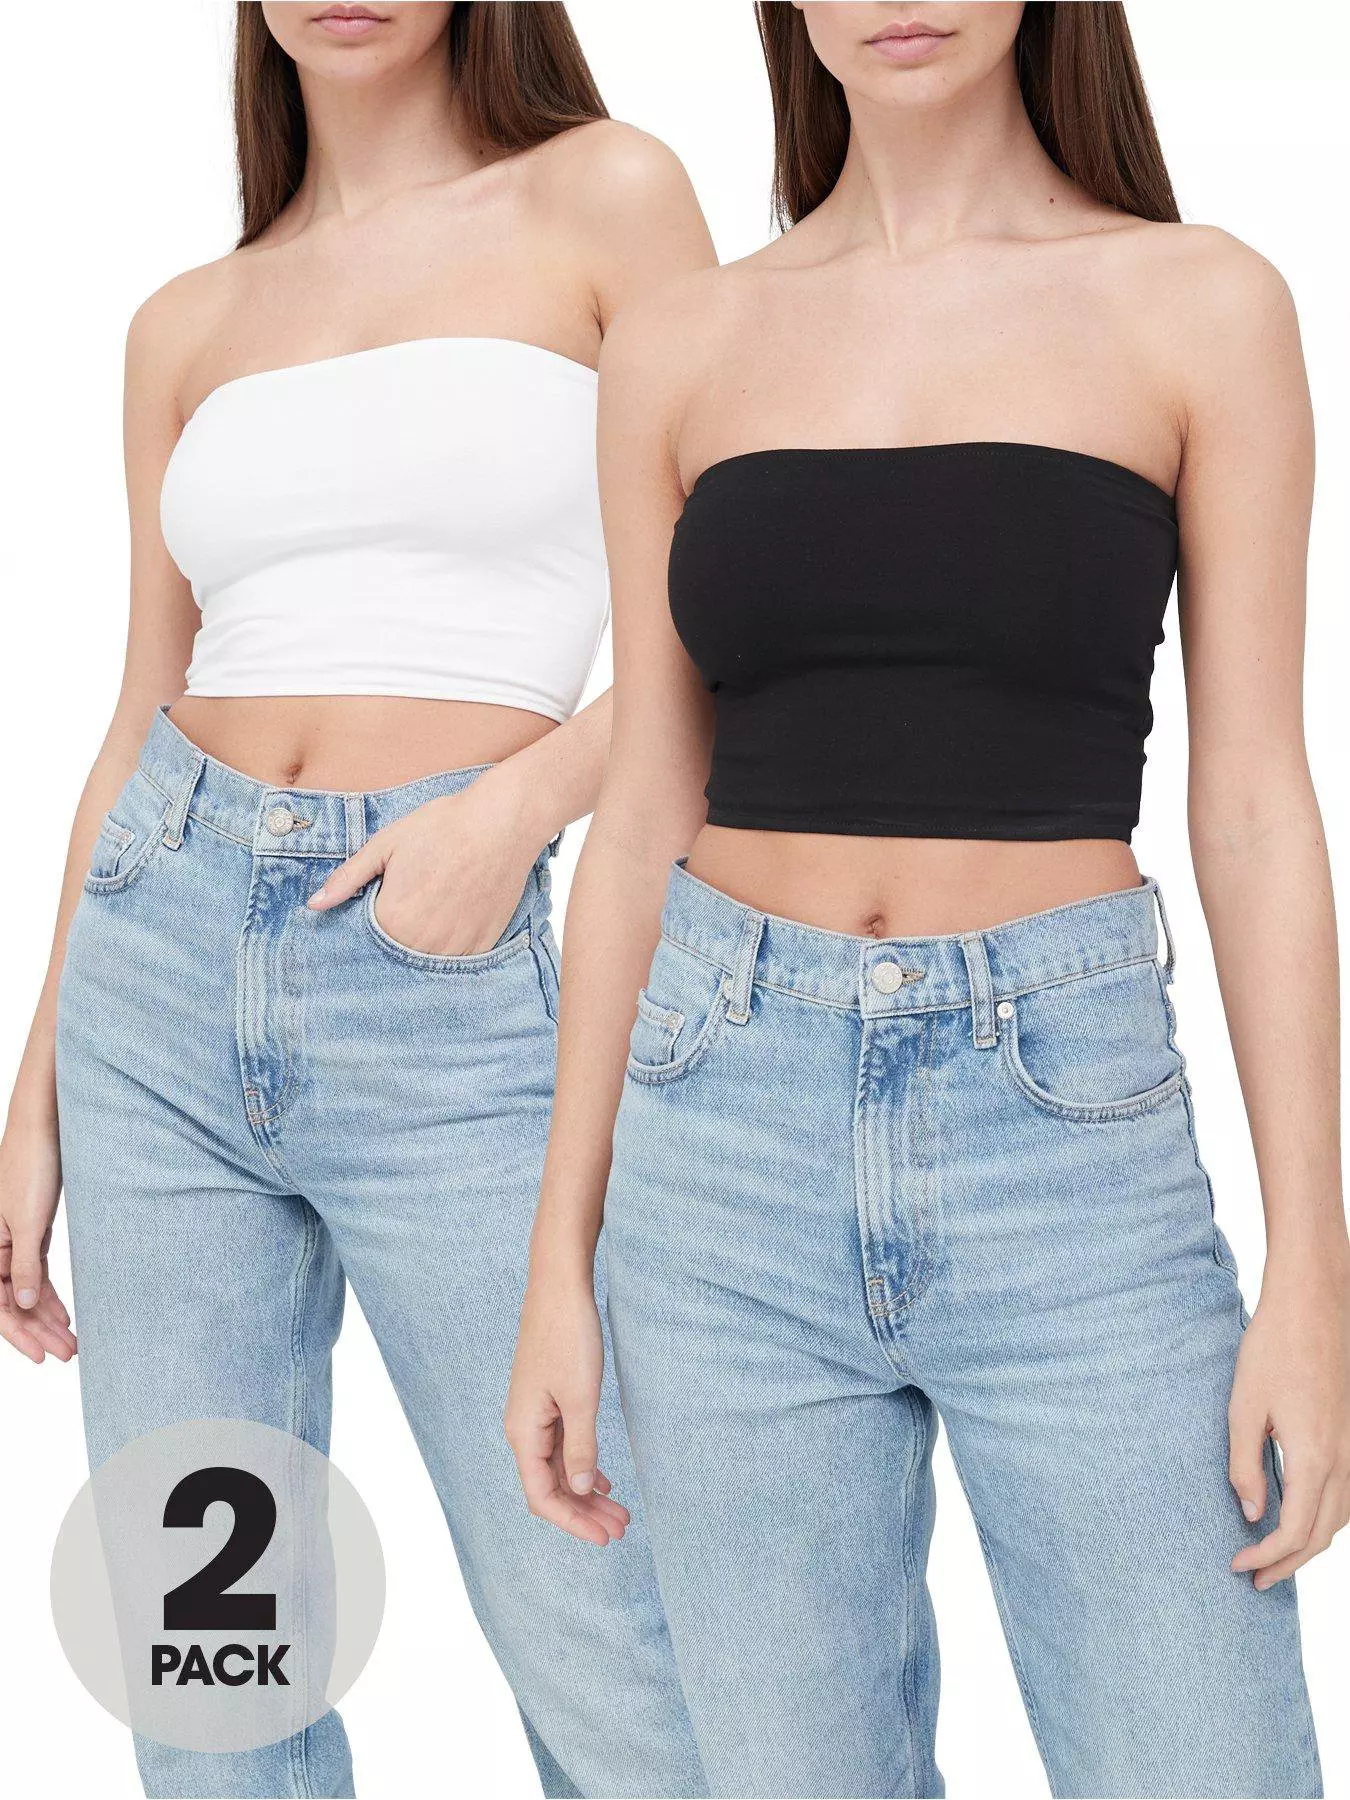 Cotton Casual Crop Boob Tube Top Bandeau Strapless